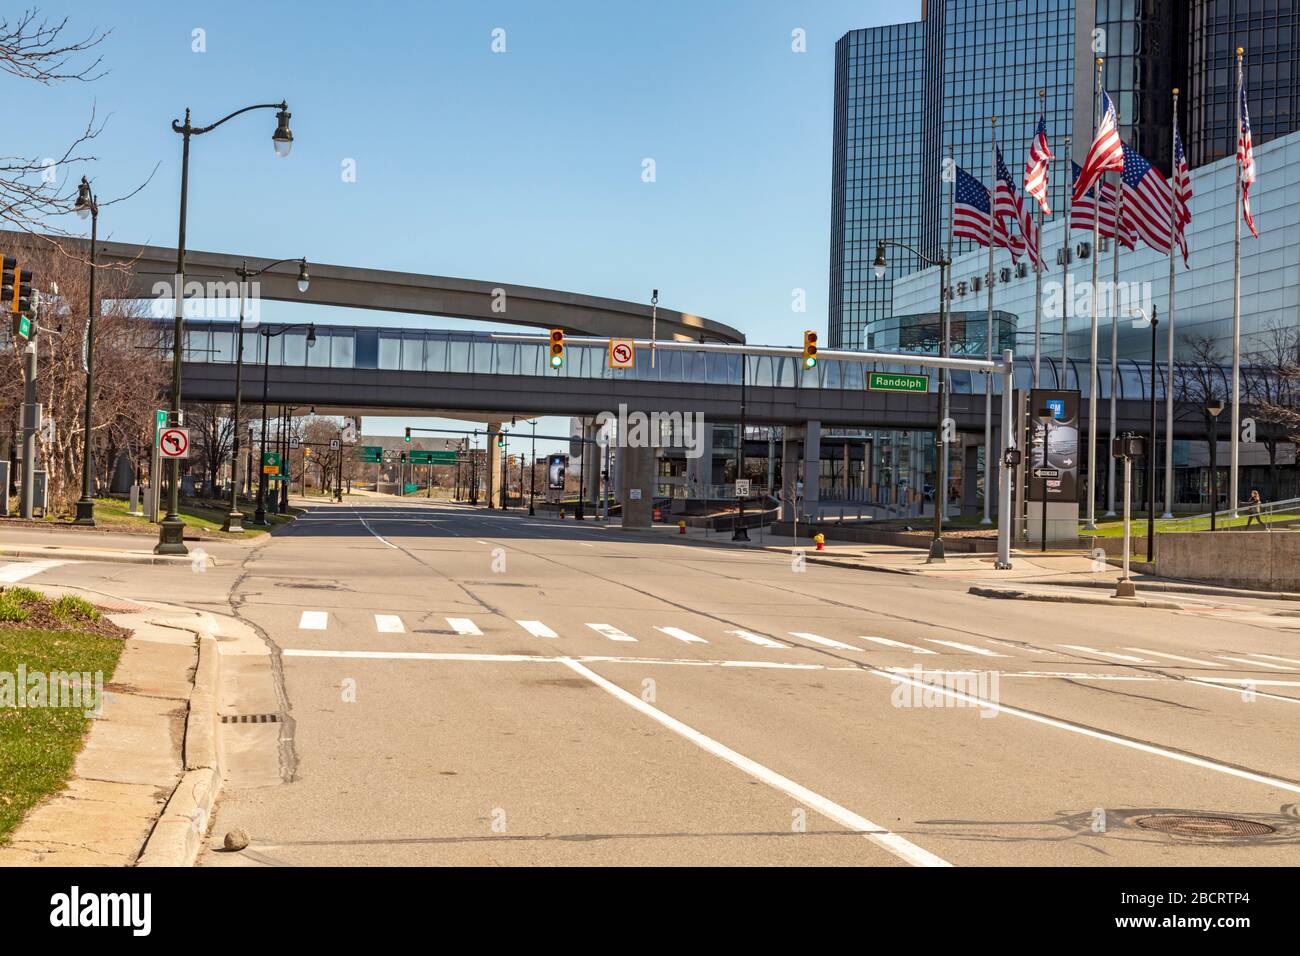 Detroit, Michigan - Due to the coronavirus crisis, downtown Detroit in front of the General Motors headquarters is nearly deserted on a weekday mornin Stock Photo